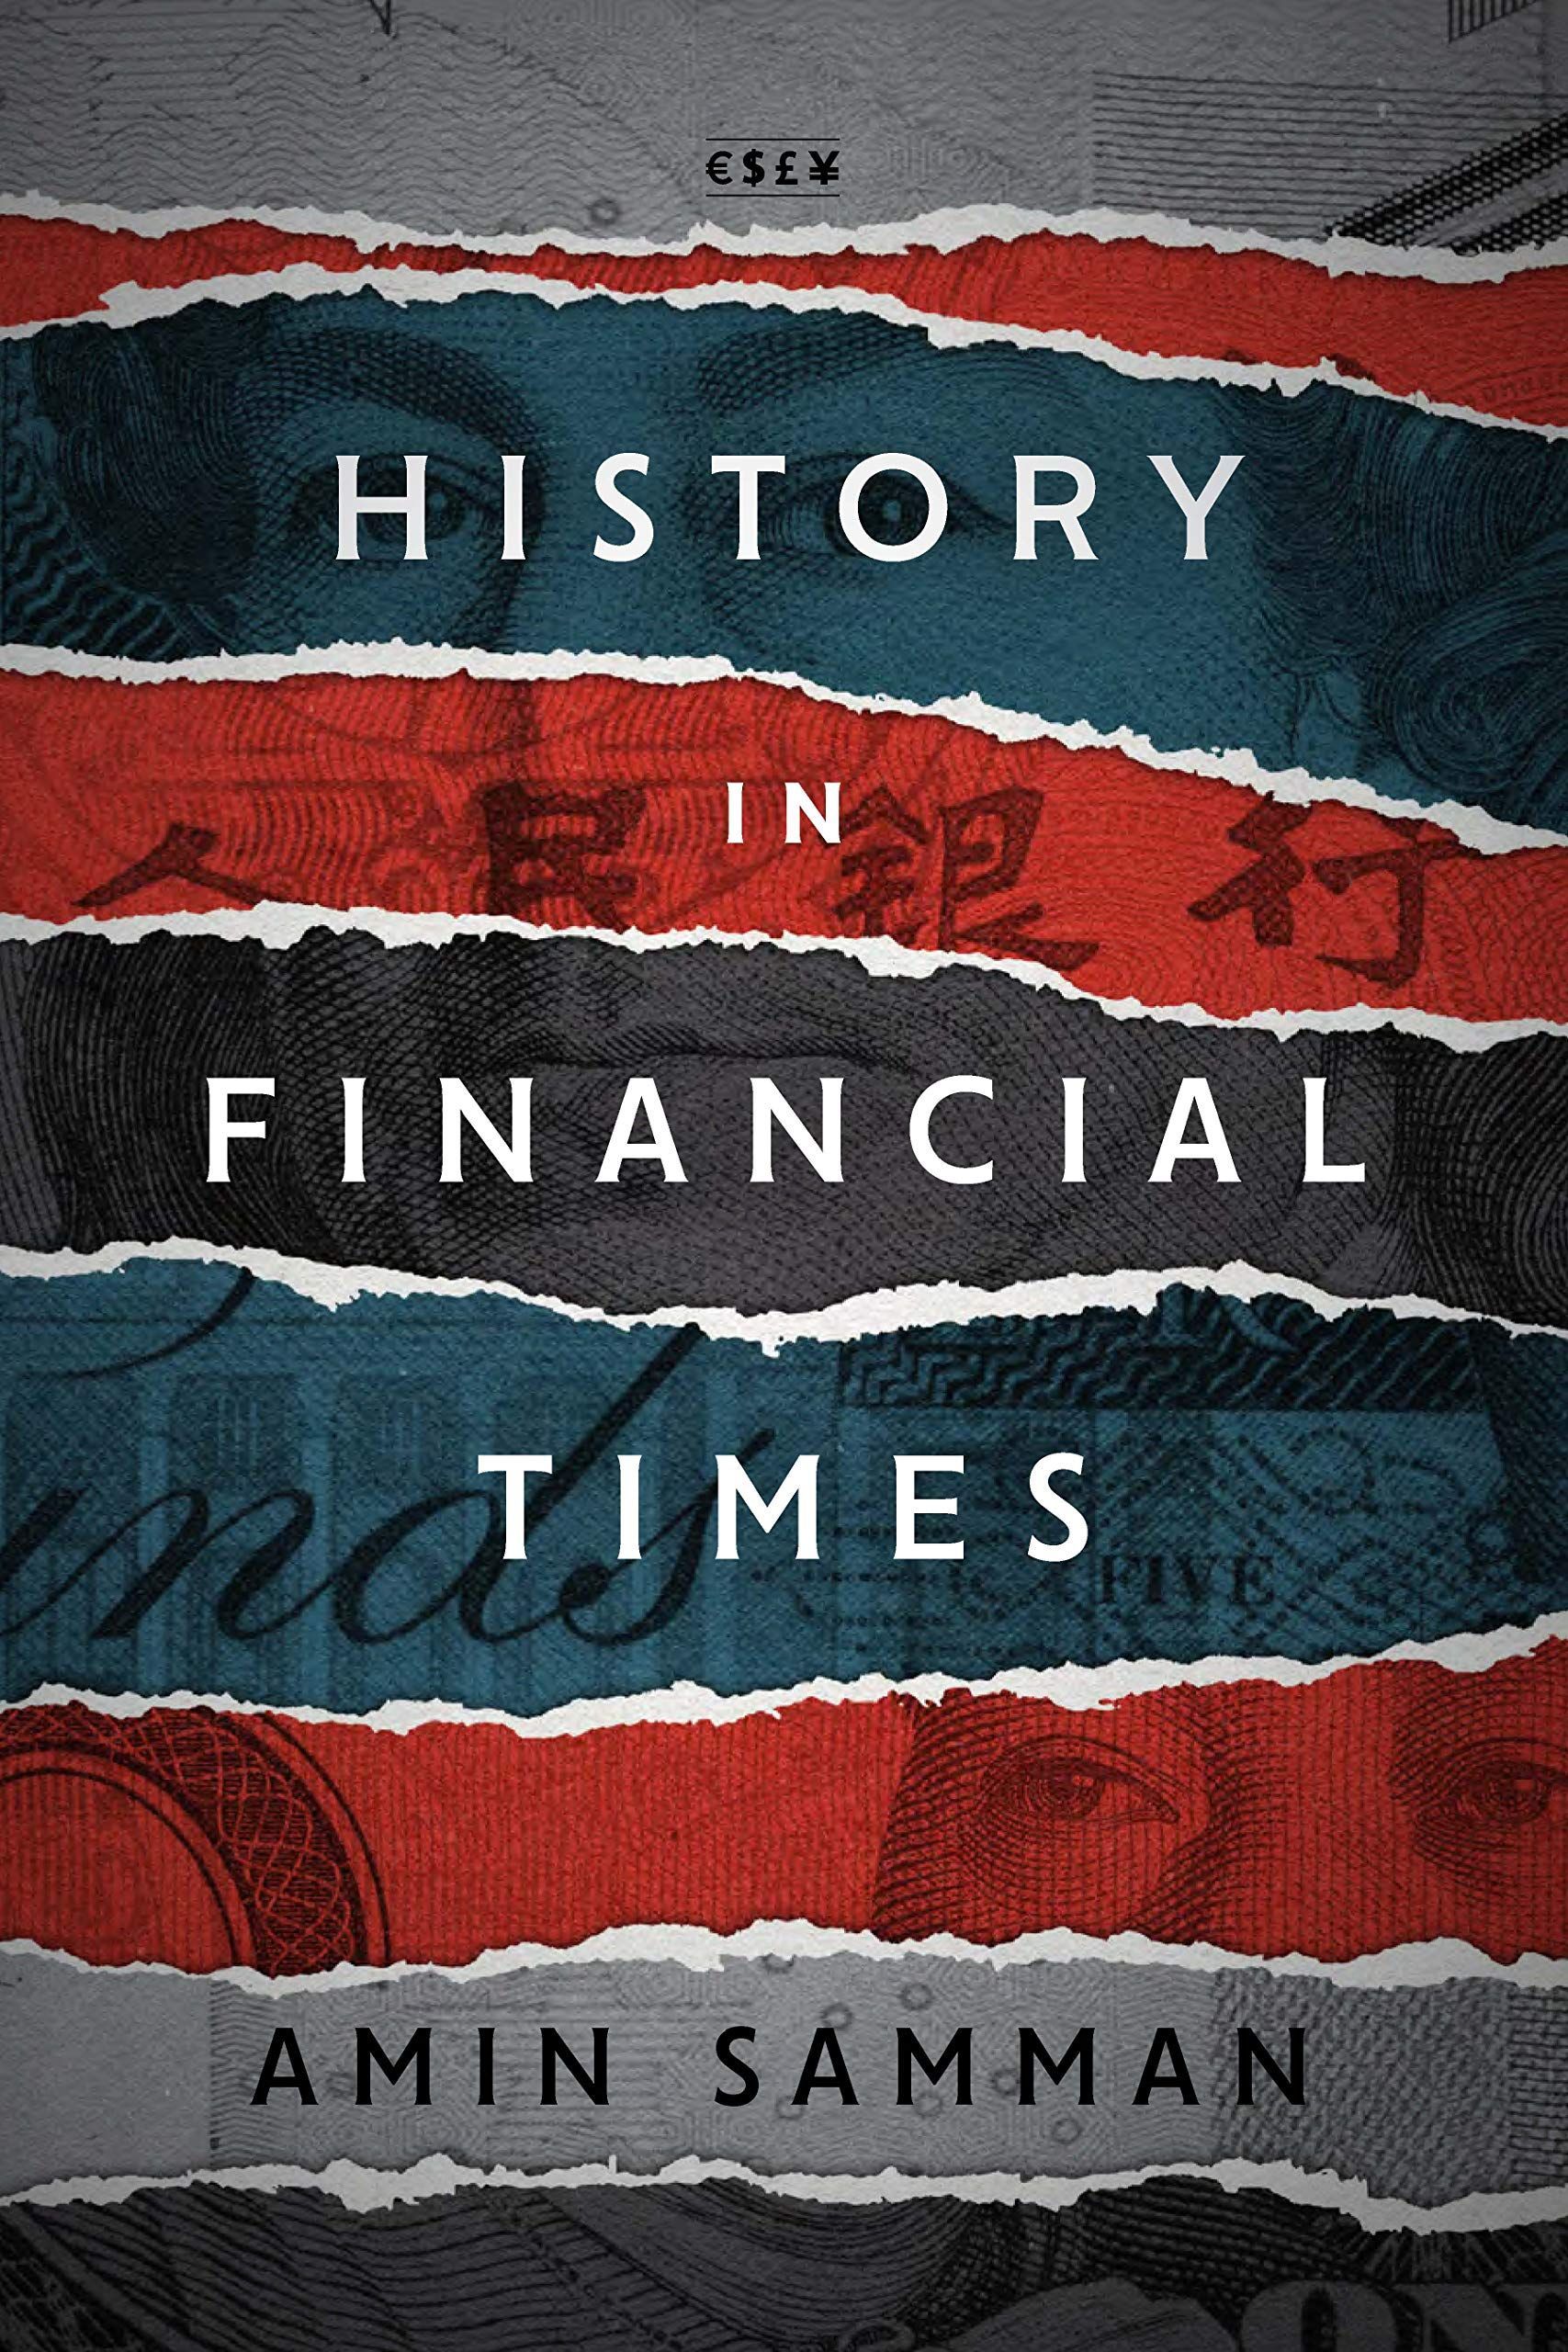 The Past Is Now: On Amin Samman’s “History in Financial Times”